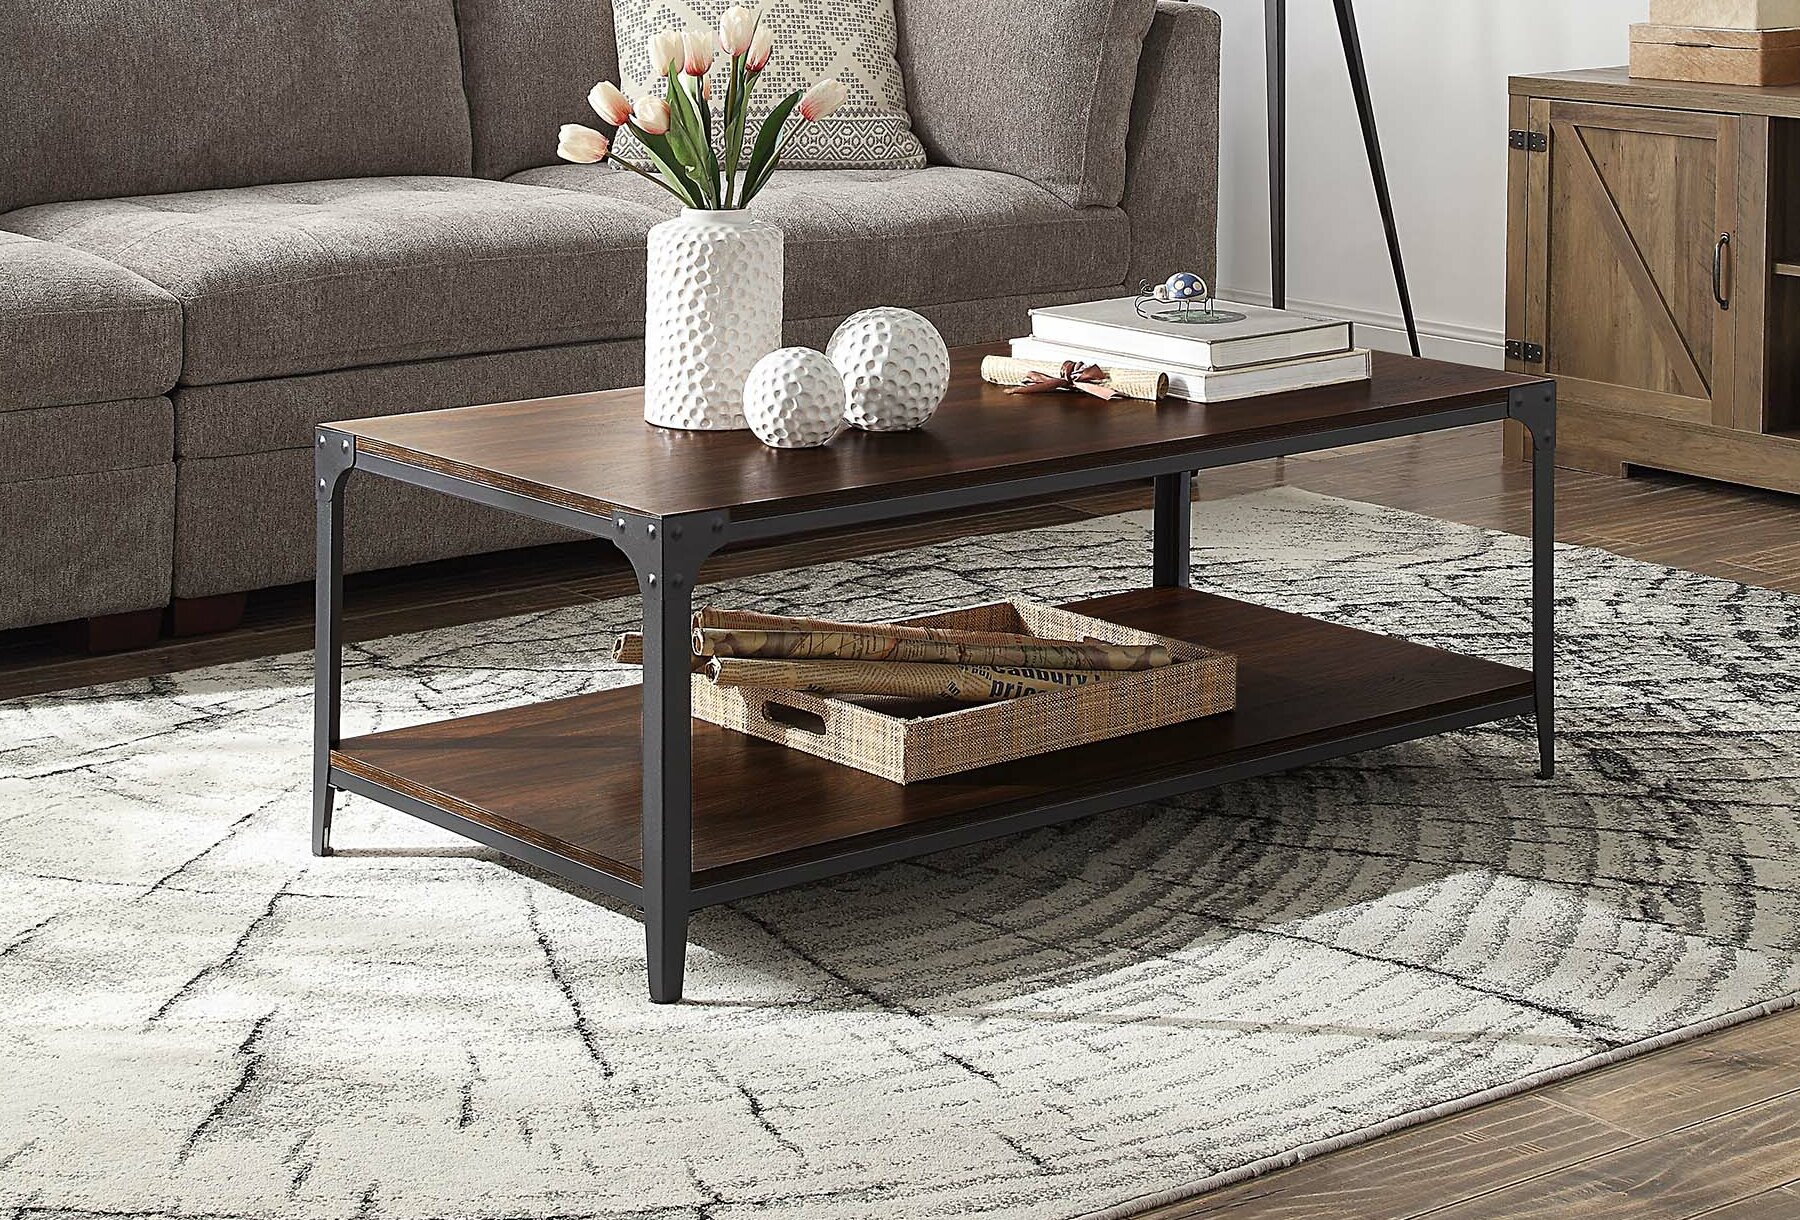 [BIG SALE] For You: Coffee Tables with Storage You’ll Love In 2020 ...